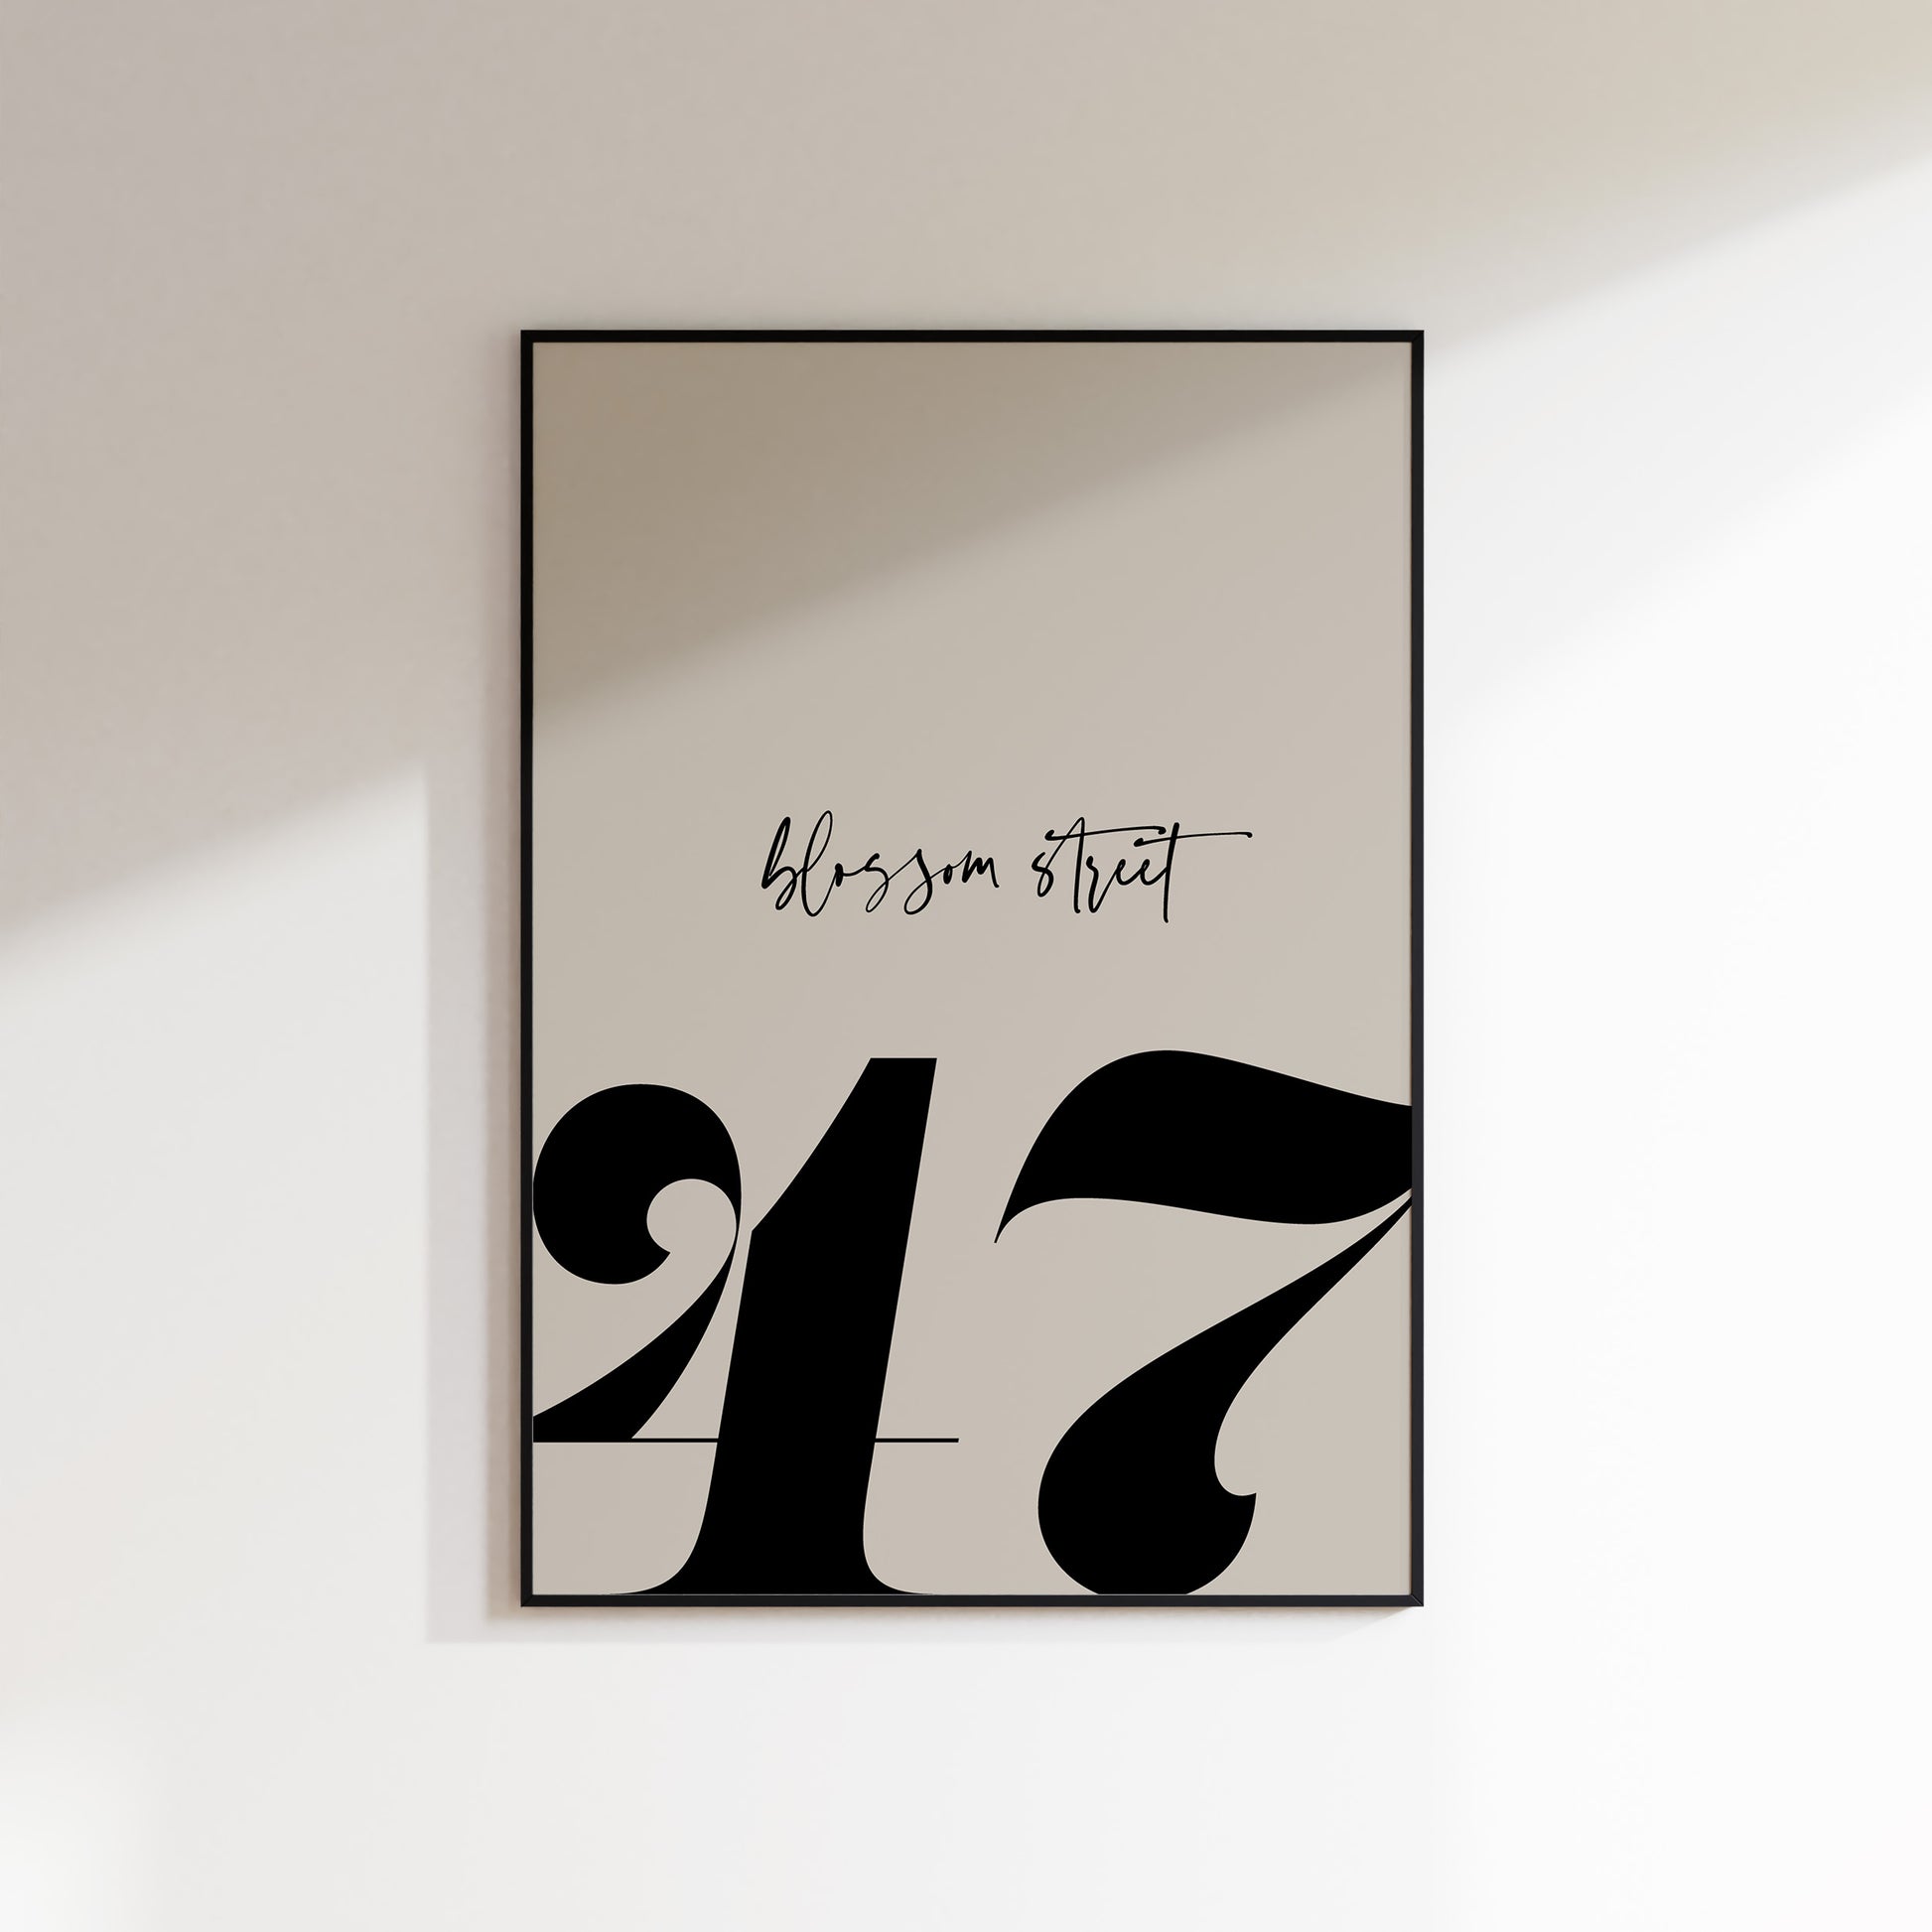 A house number print for the home, ideal for hallways, living rooms and bedrooms. This is a neutral beige coloured print with a slate coloured house number in a bold serif typeface, and the street name above in a handwriting style typeface. Print is in a black frame on a white wall background.